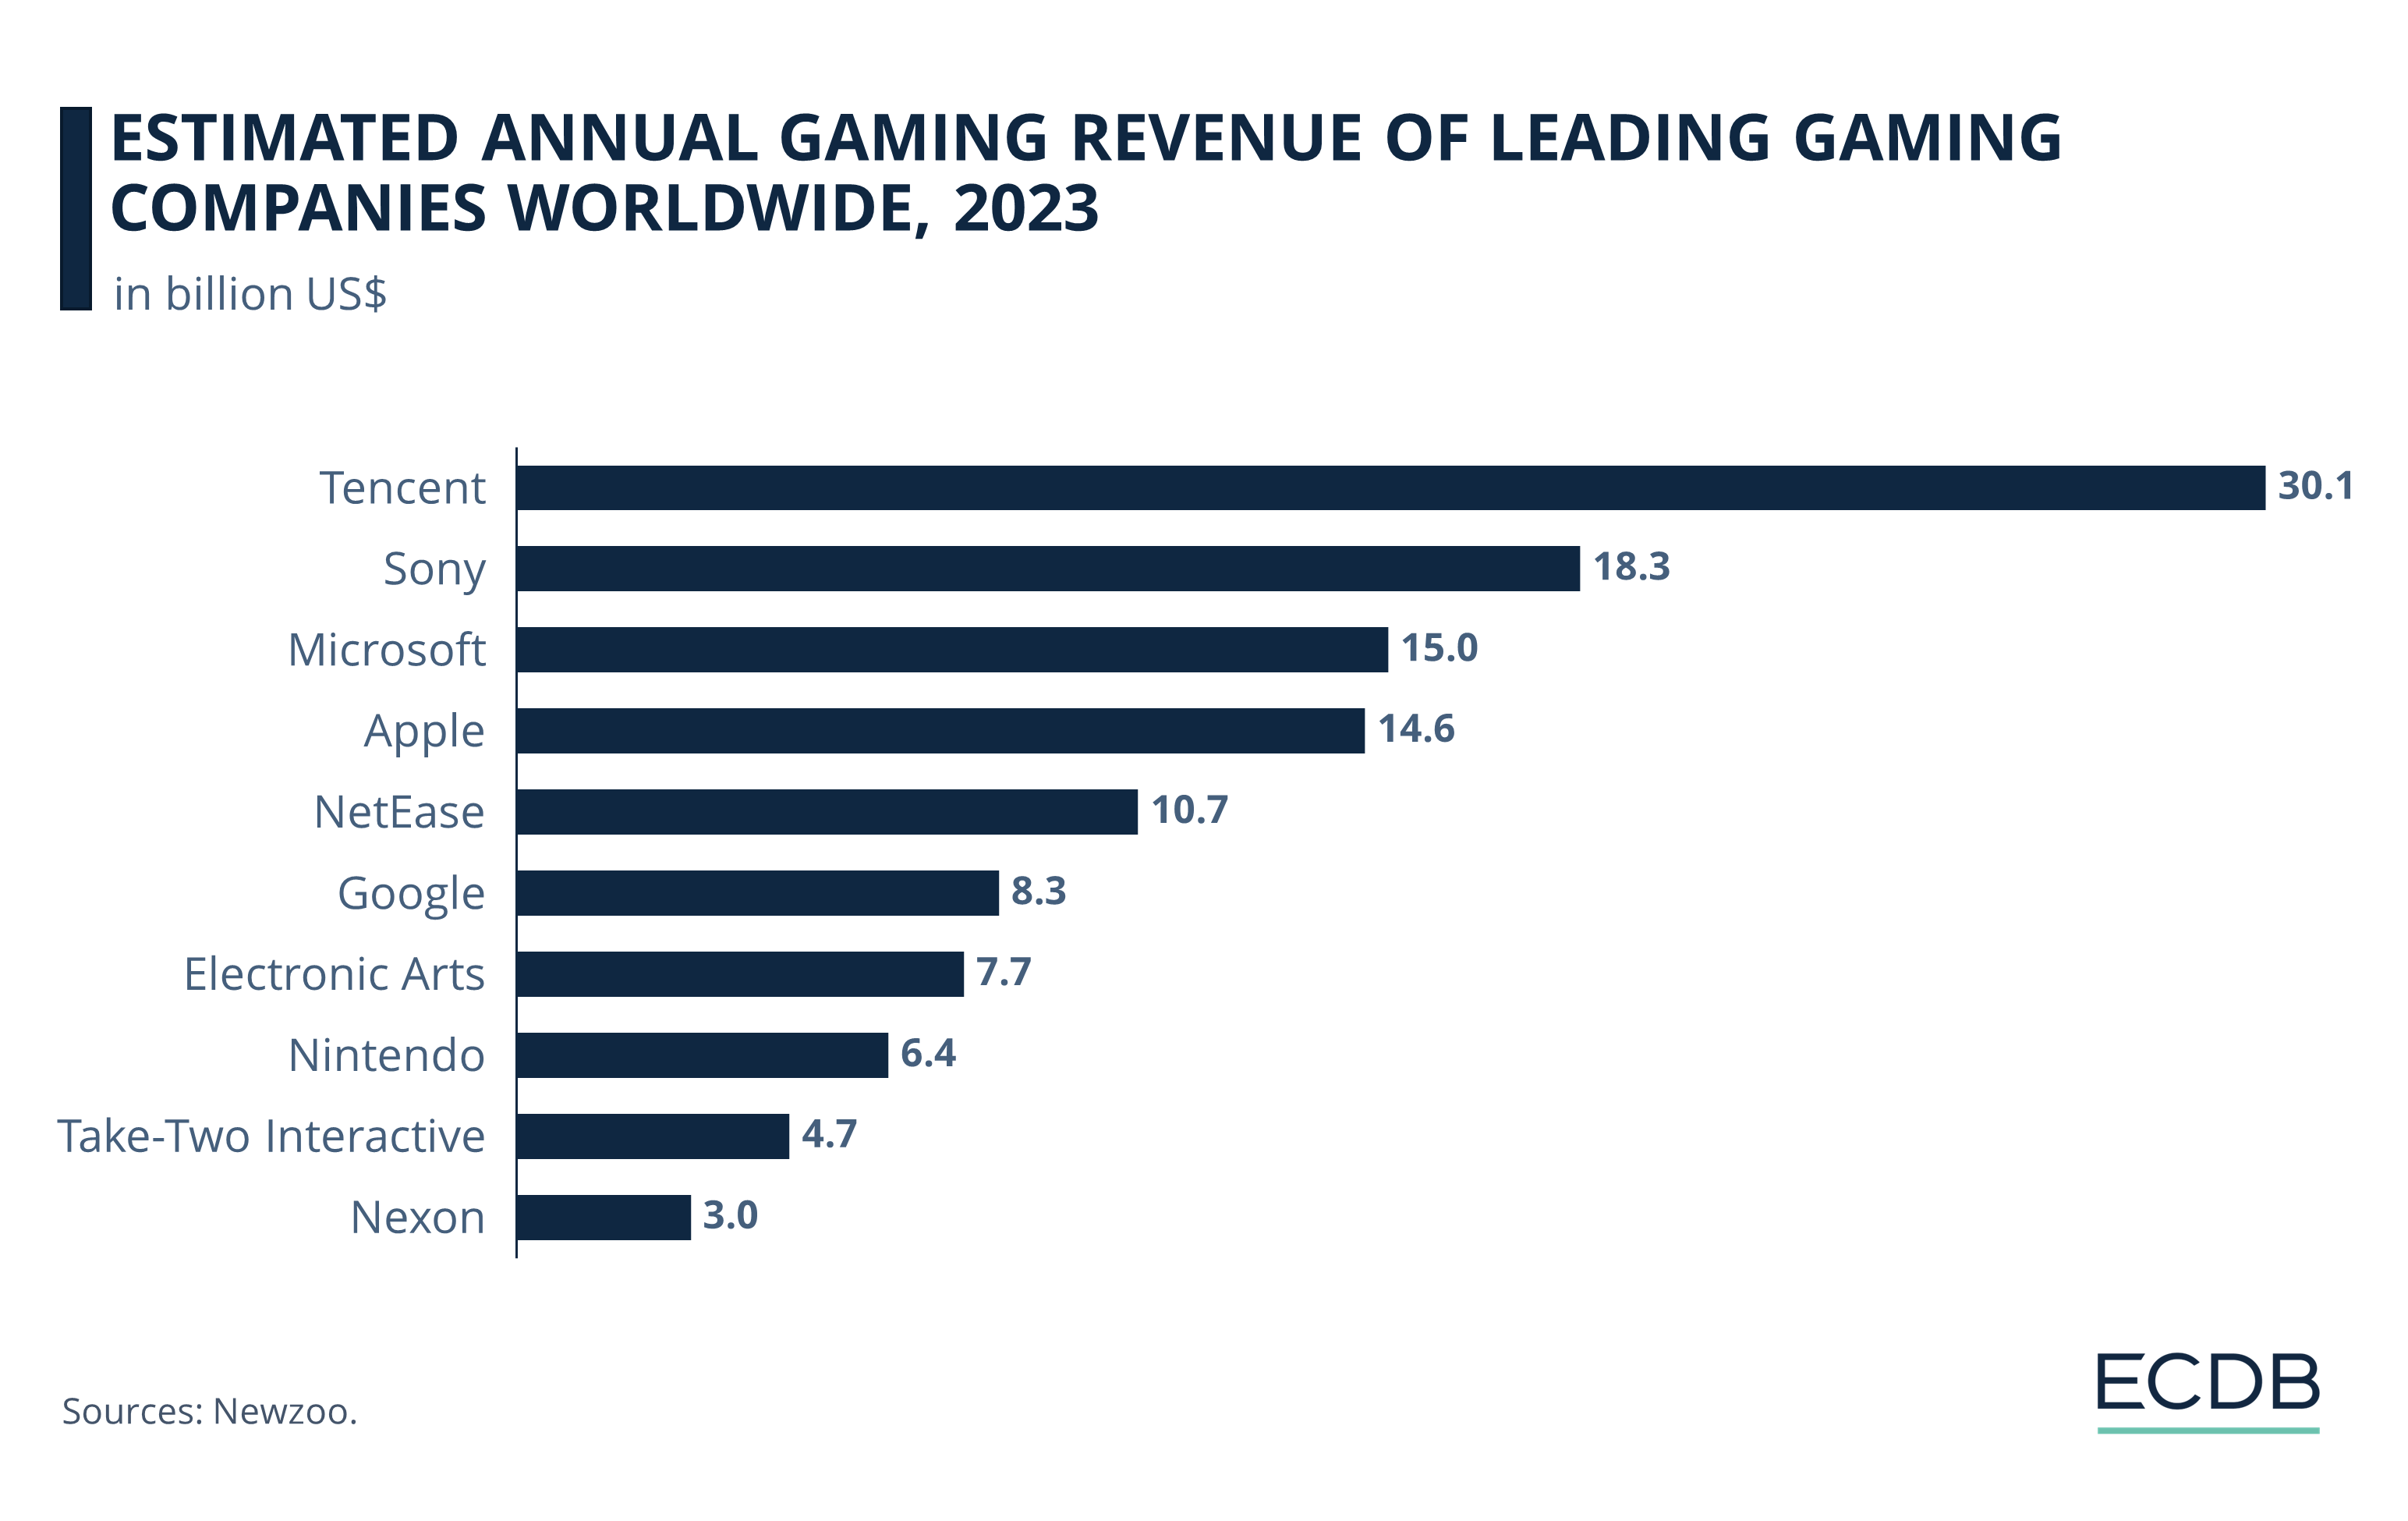 Estimated Annual Gaming Revenue of Leading Gaming Companies Worldwide, 2022